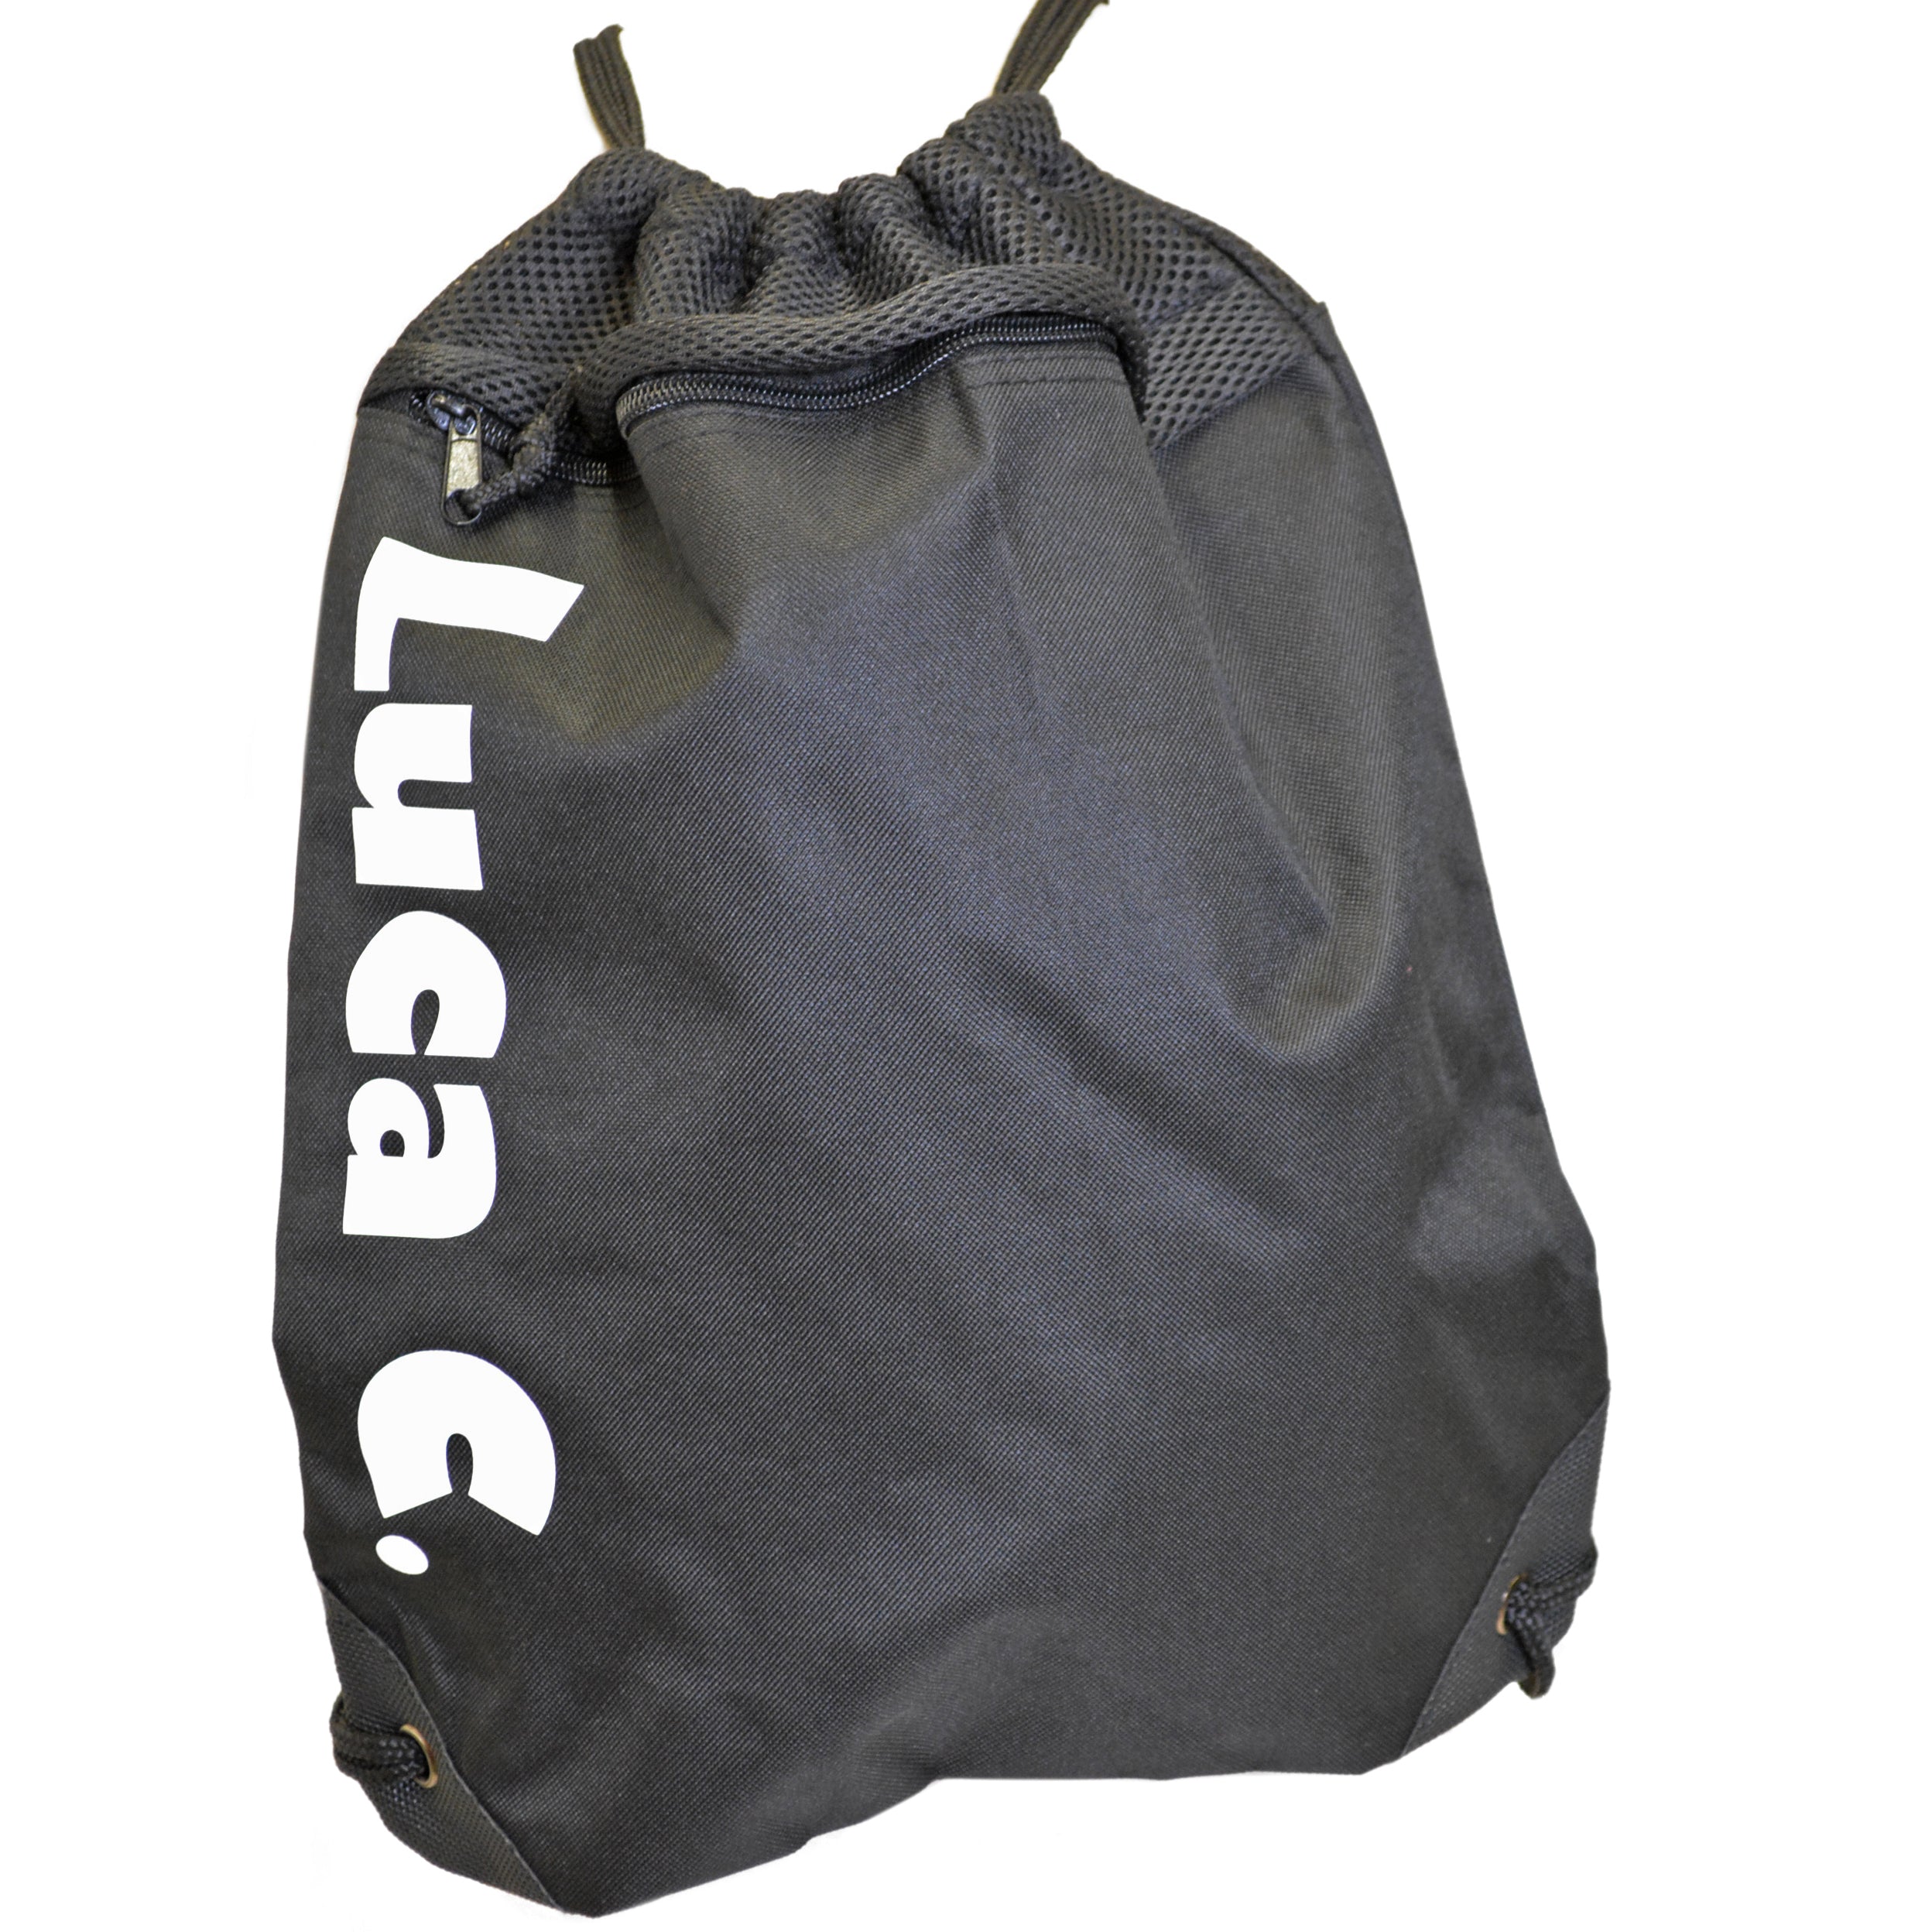  Personalized  Mesh Sport Drawstring  Backpack 